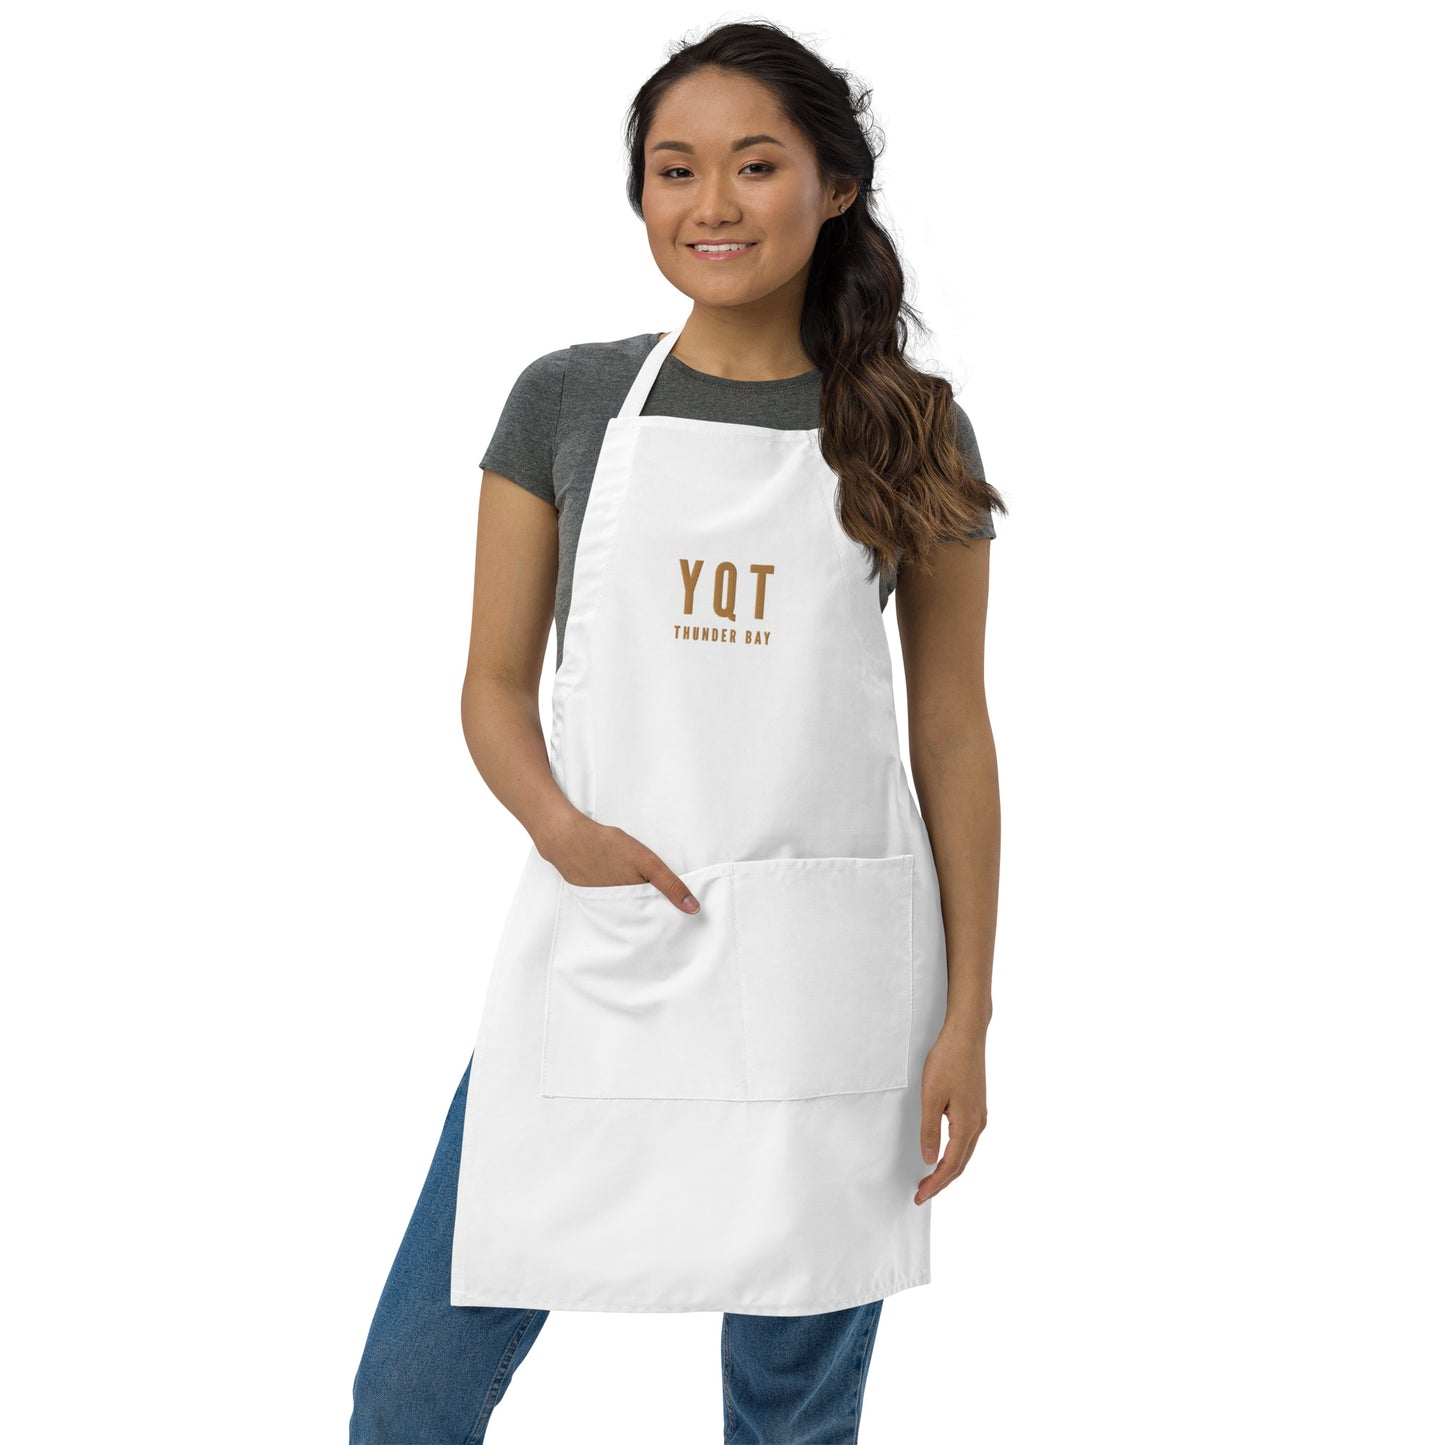 City Embroidered Apron - Old Gold • YQT Thunder Bay • YHM Designs - Image 10